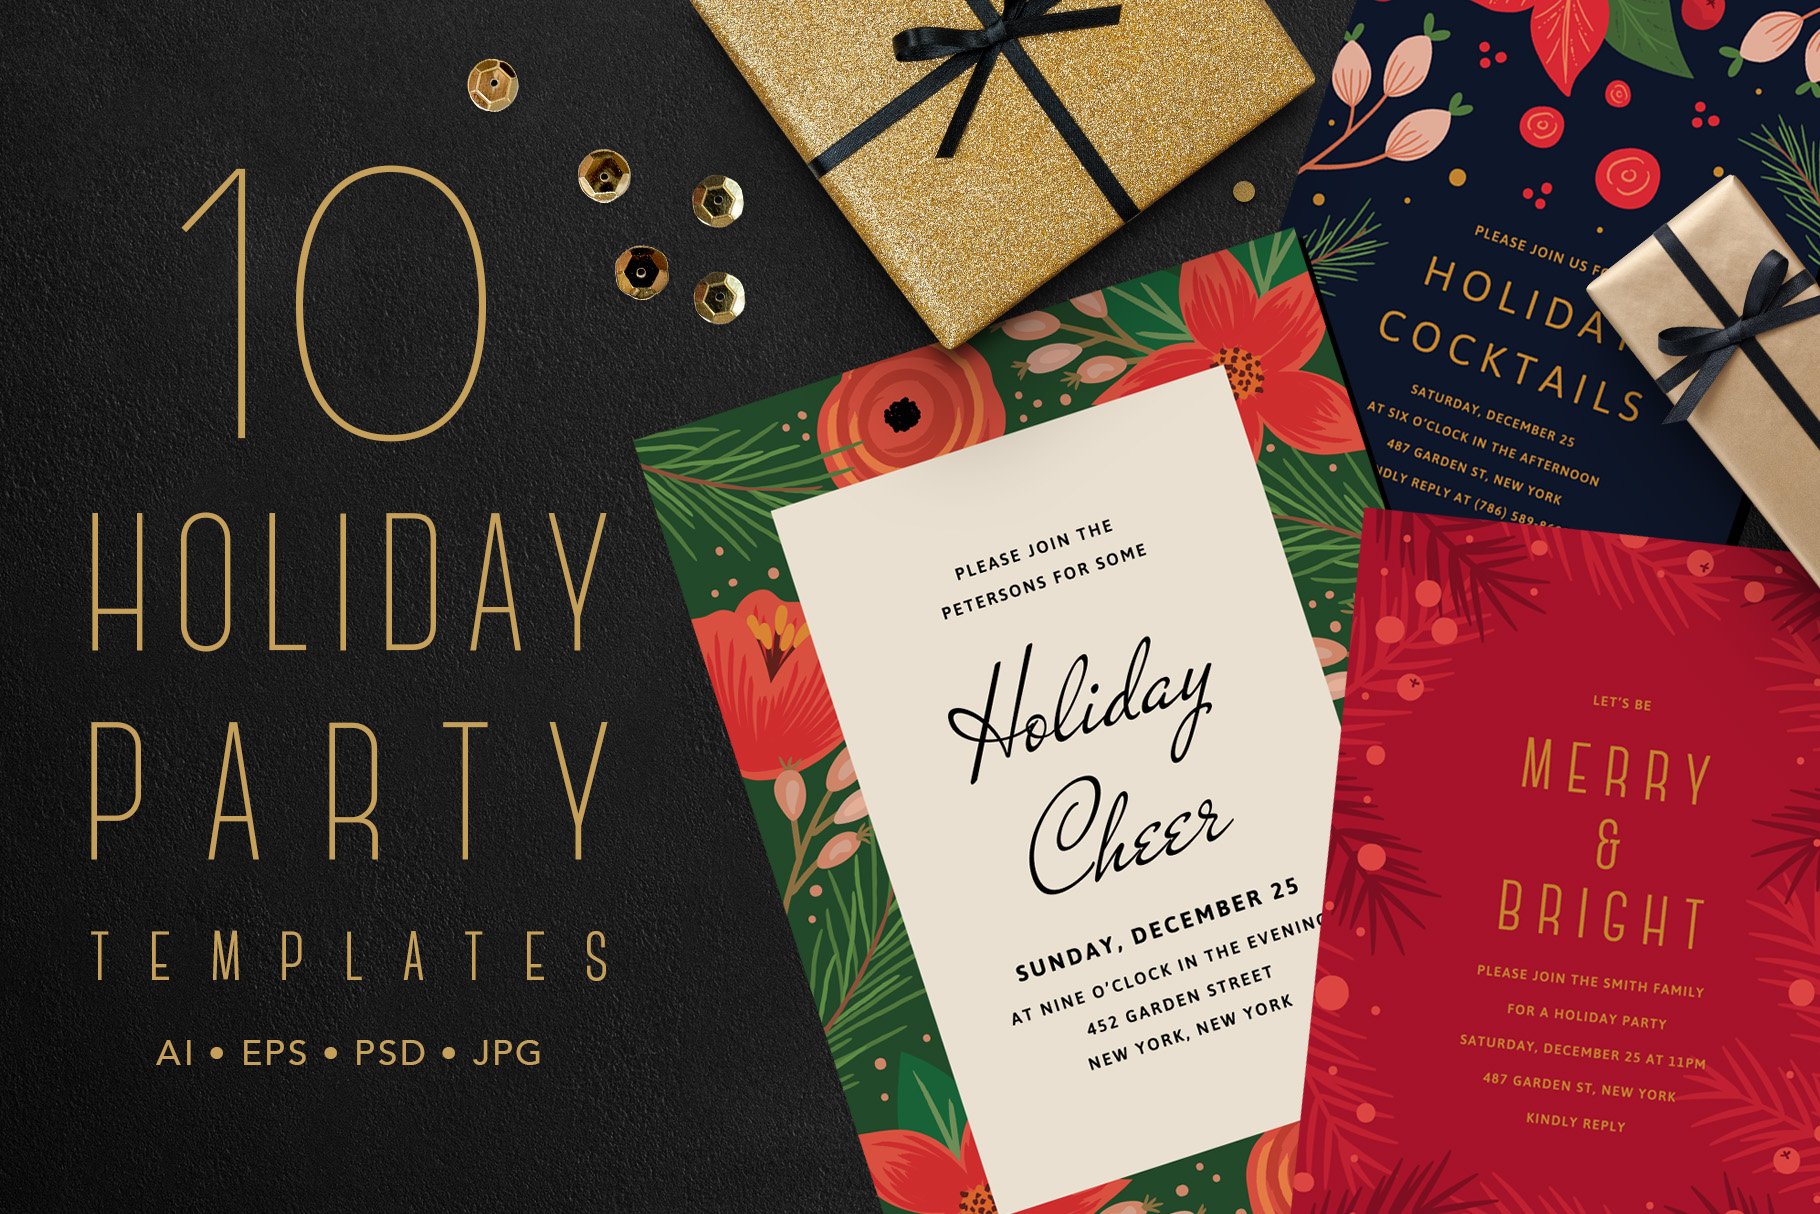 HOLIDAY PARTY TEMPLATES cover image.